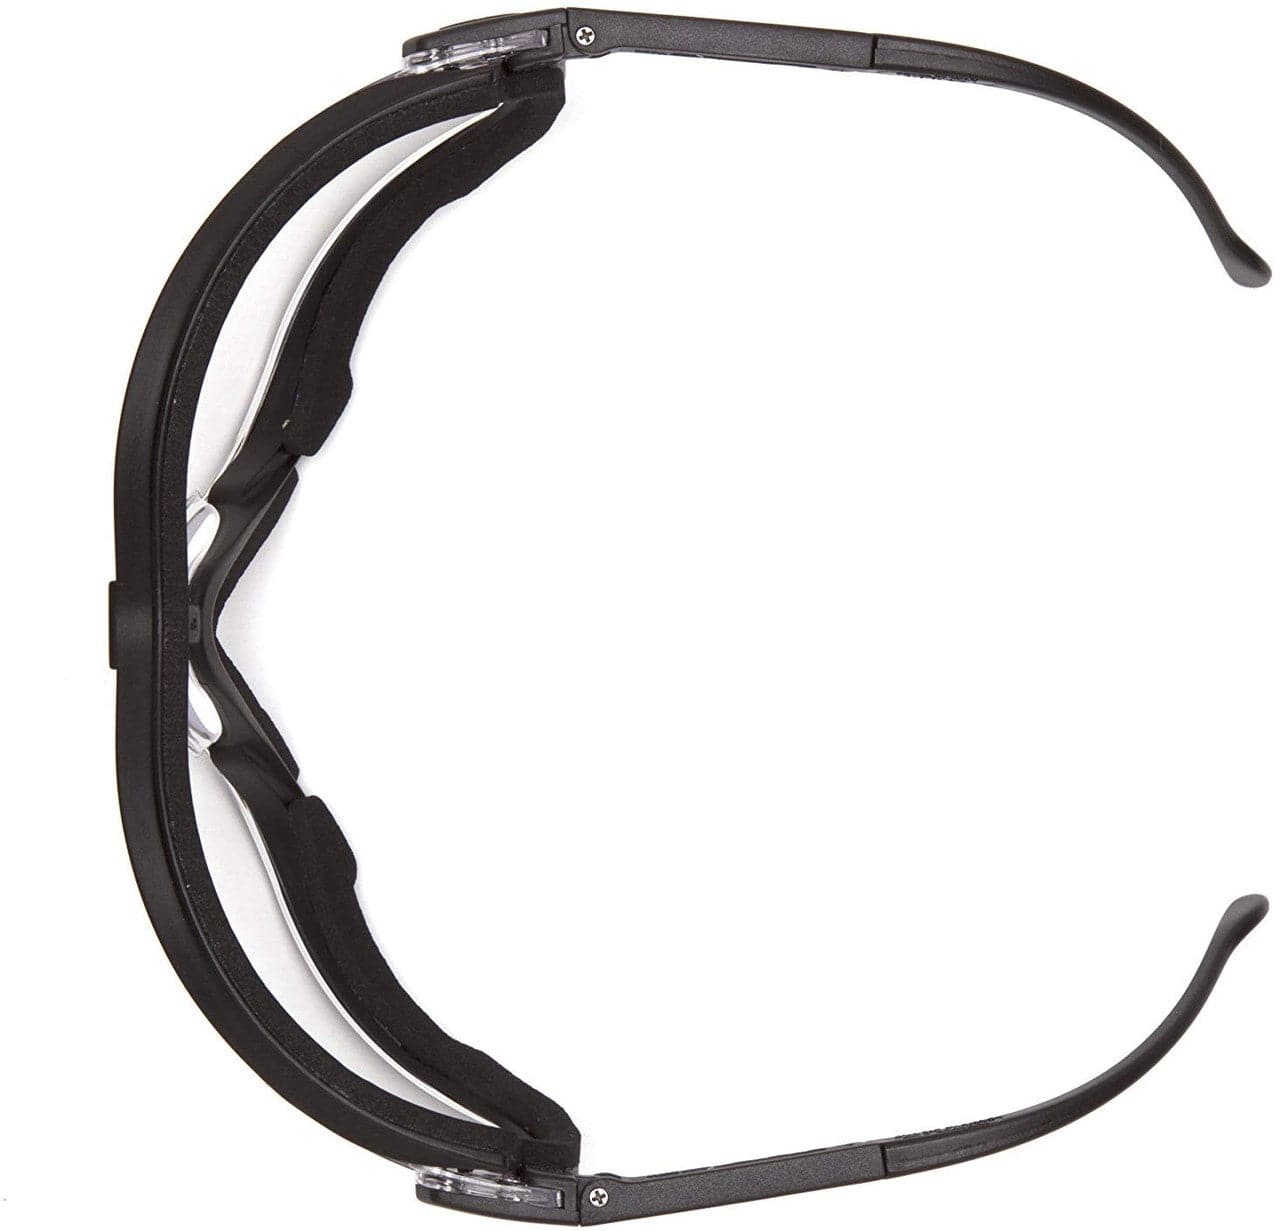 Pyramex V2G Safety Glasses/Goggles with Black Frame and Gray H2MAX Anti-Fog Lens GB1820STM - Top View